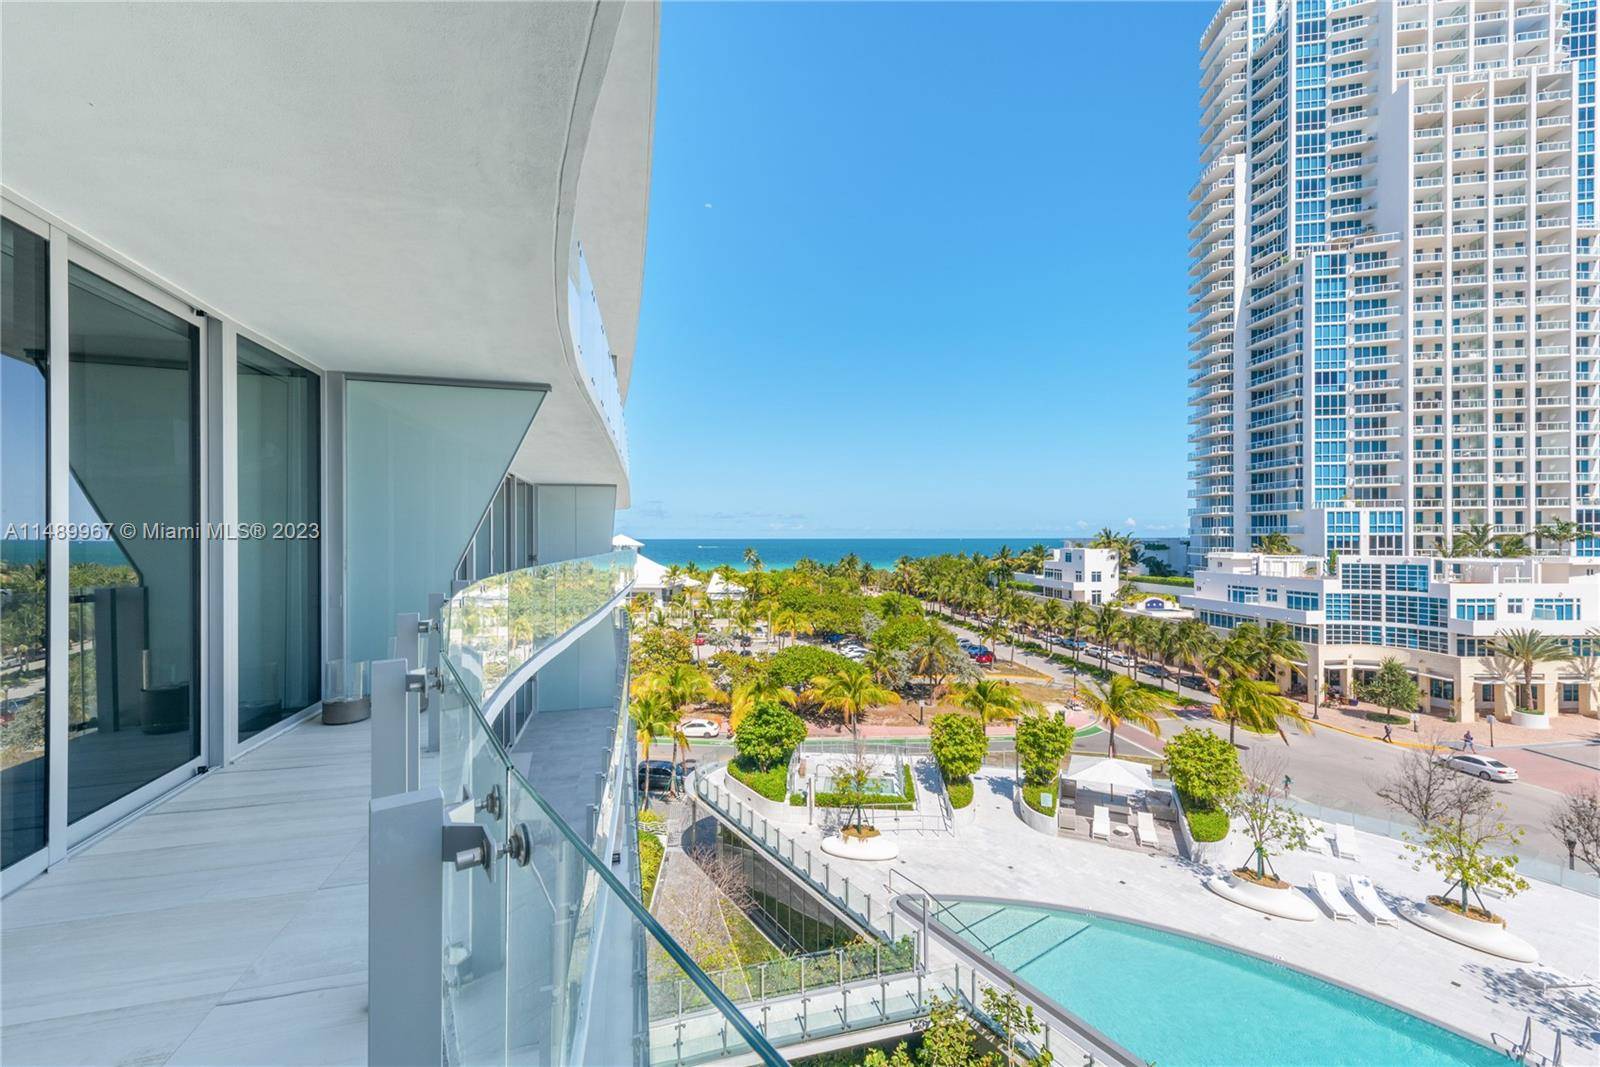 Crafted by Enrique Norton, One Ocean presents a distinctive residential experience situated in the vibrant South of Fifth neighborhood, Miami Beach's most sought after locale.